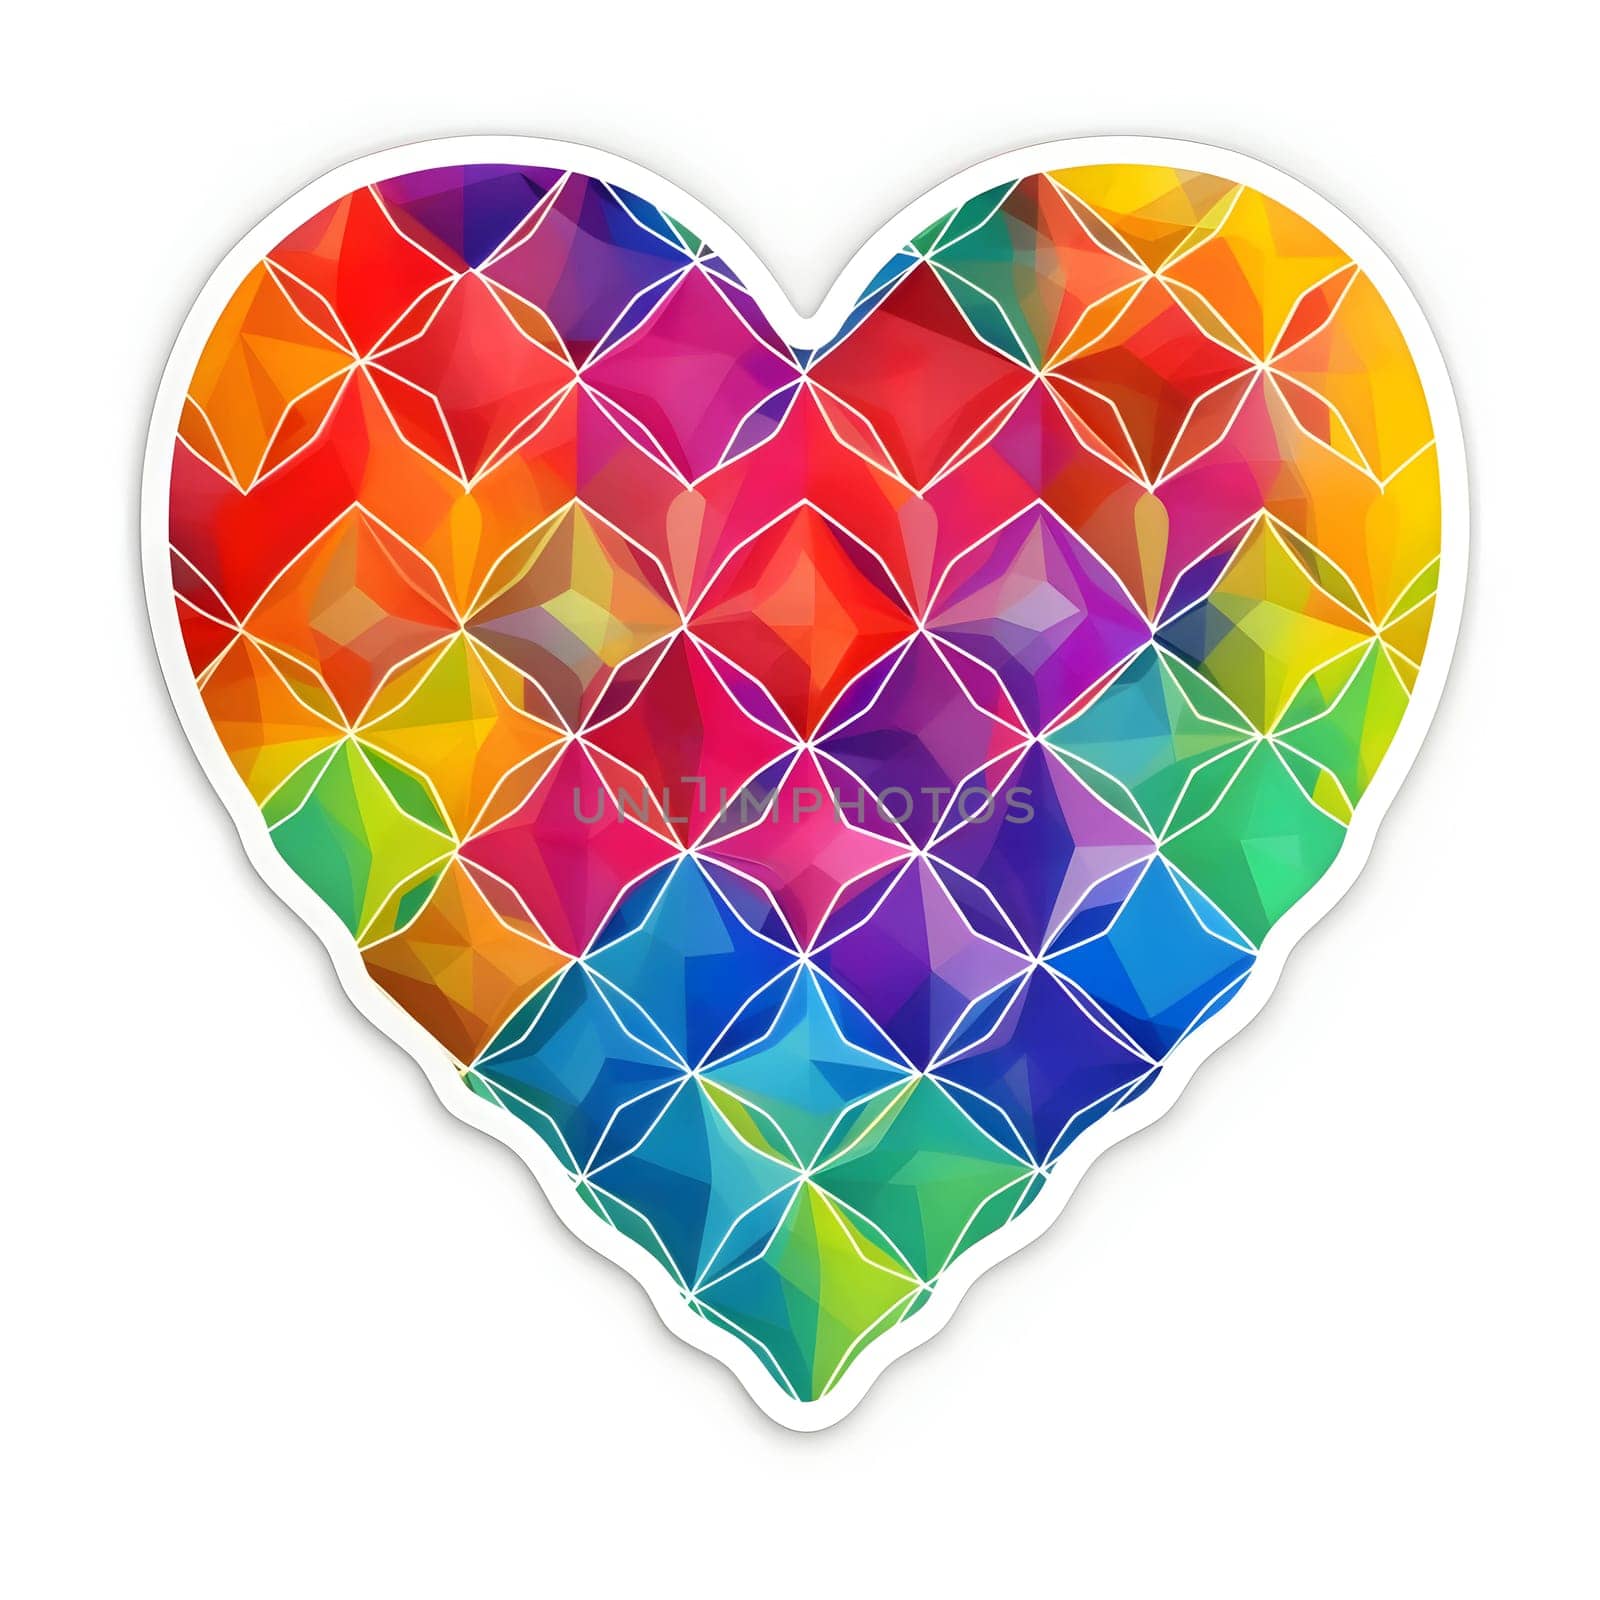 A heart formed by vibrant rainbow splashes, standing out against a clean white background, symbolizing joy, diversity, and love.